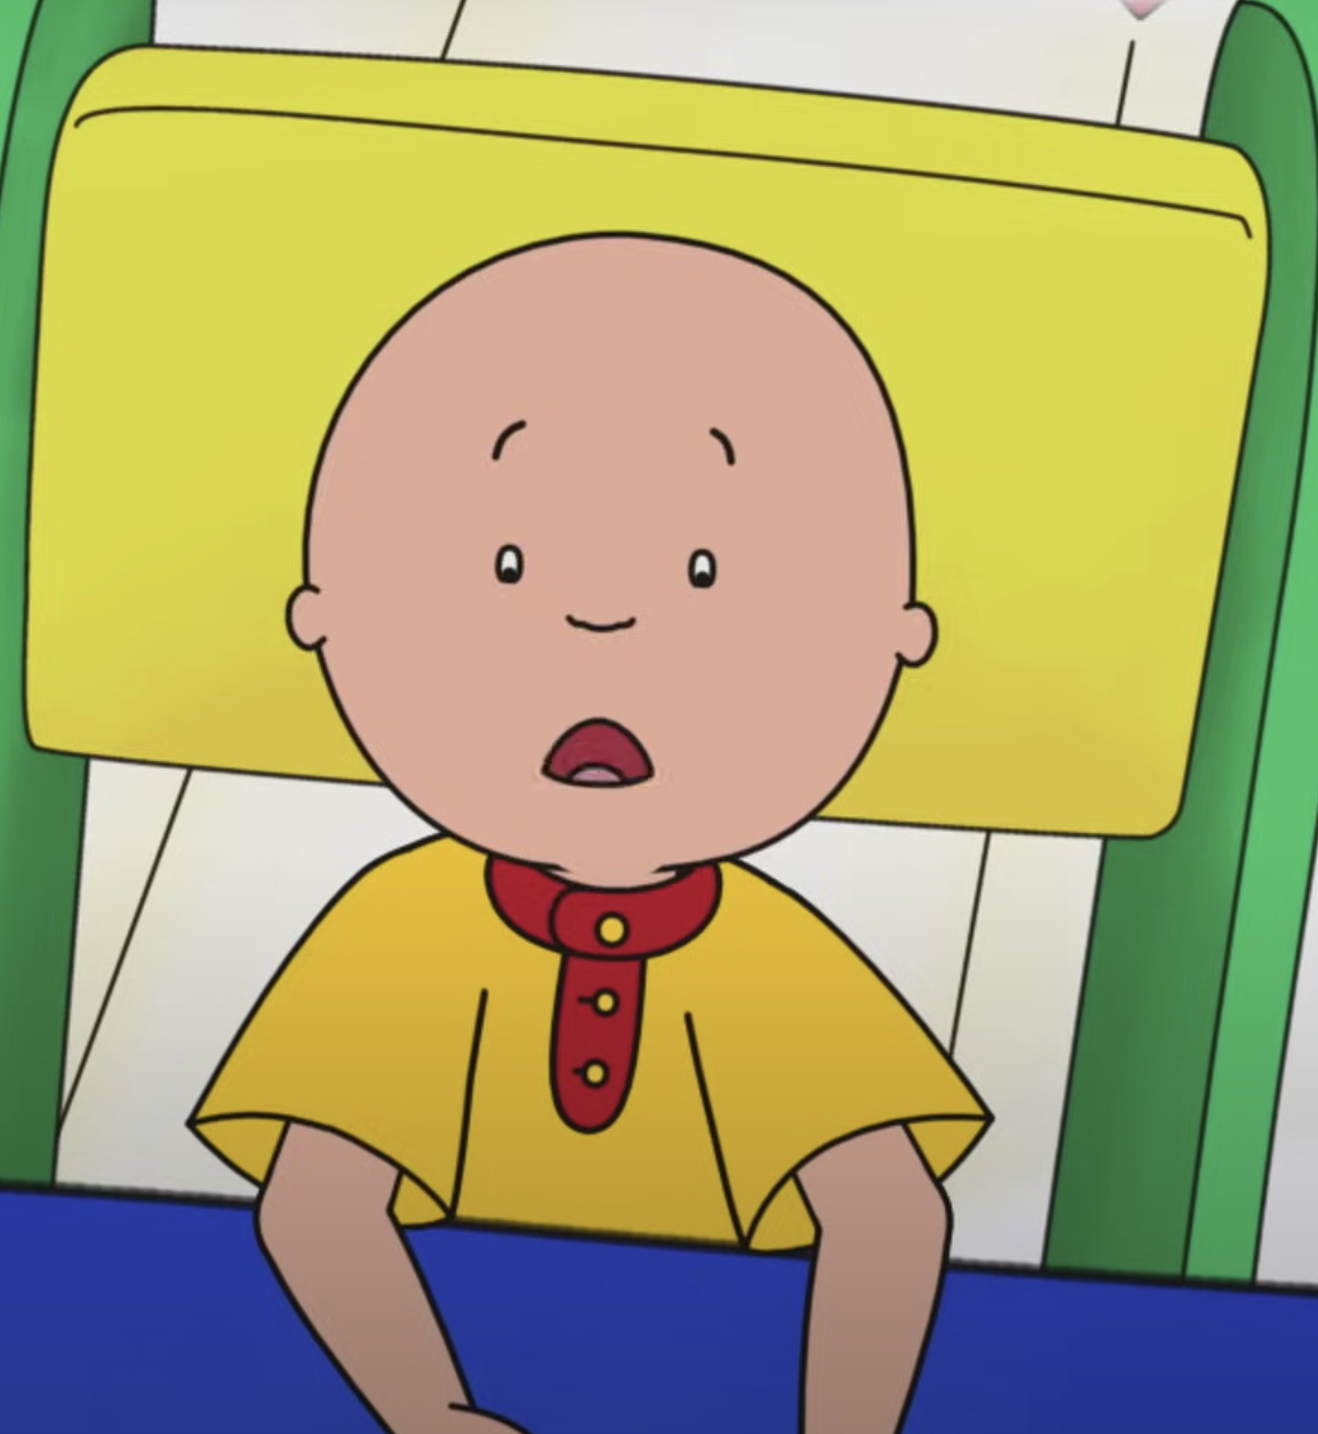 Caillou sits in a chair and gasps.